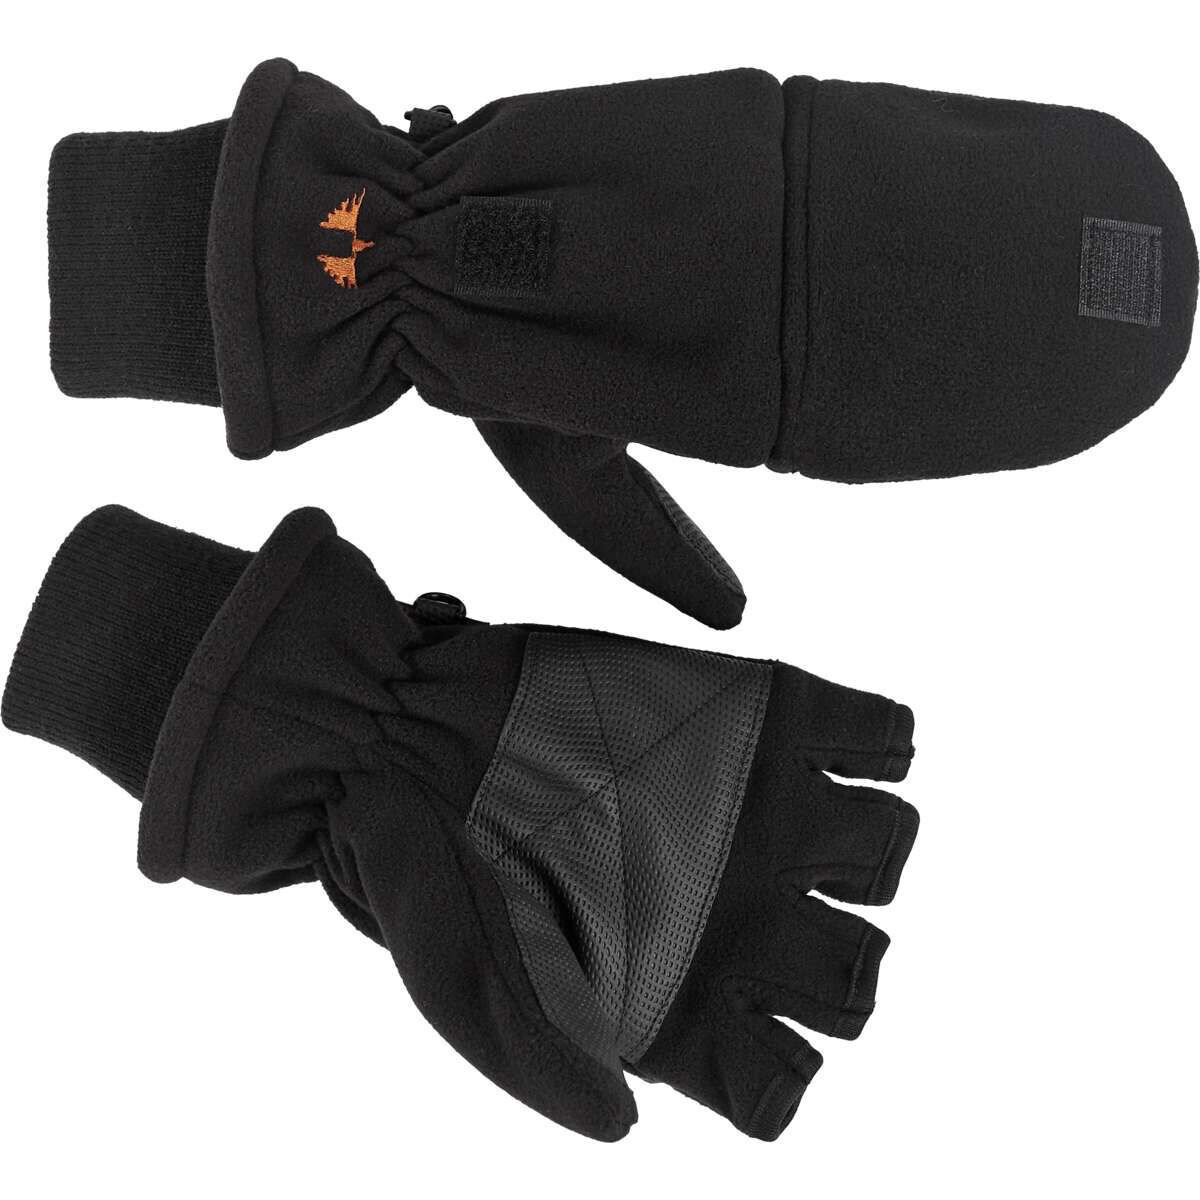 Swedteam crest thermo glove Hunting Green